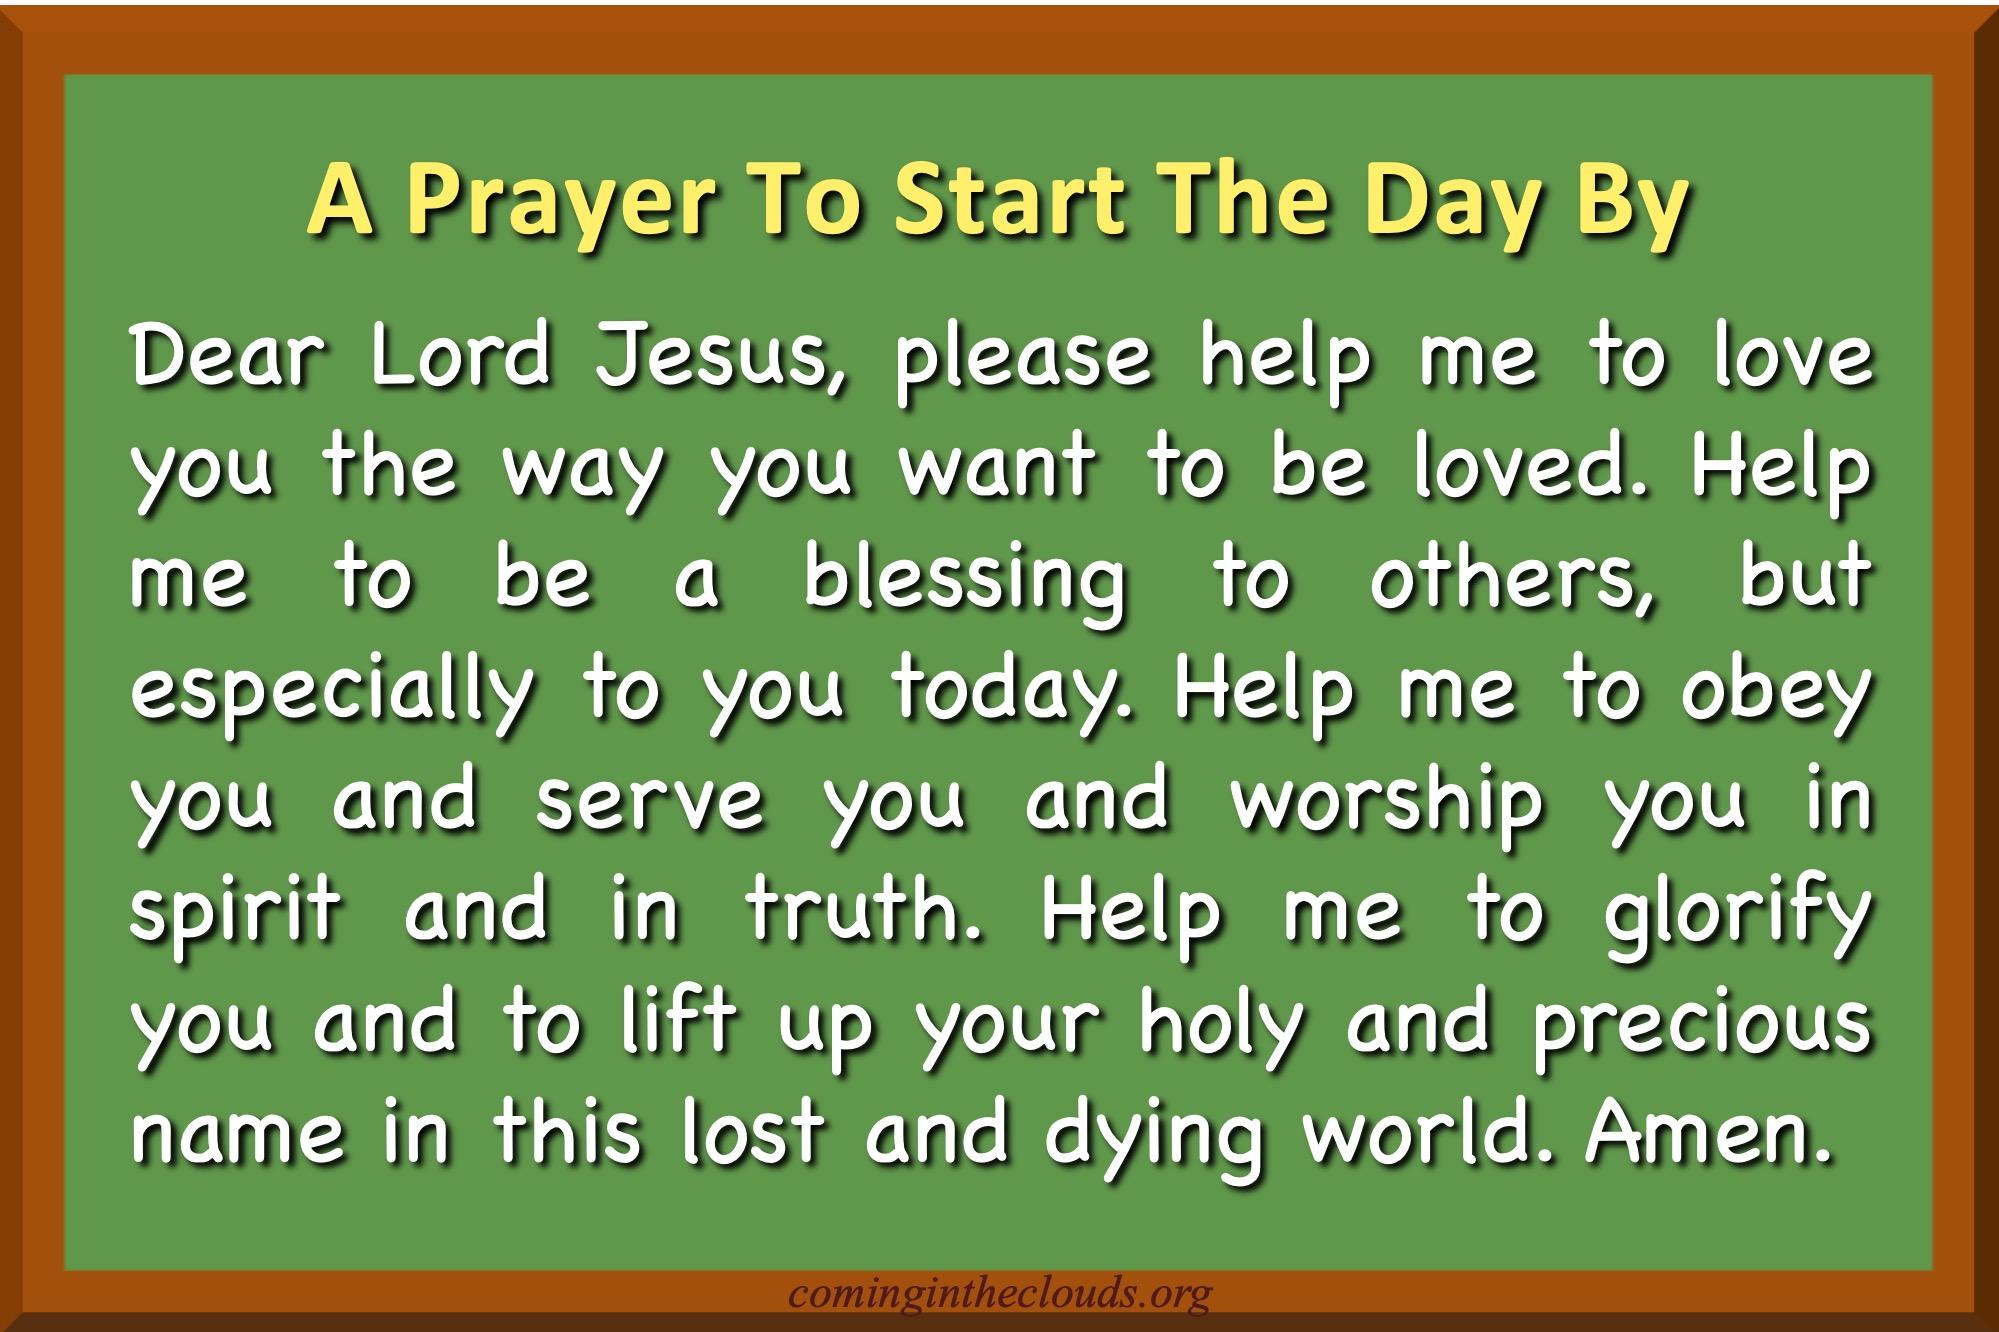 A prayer to start the day by